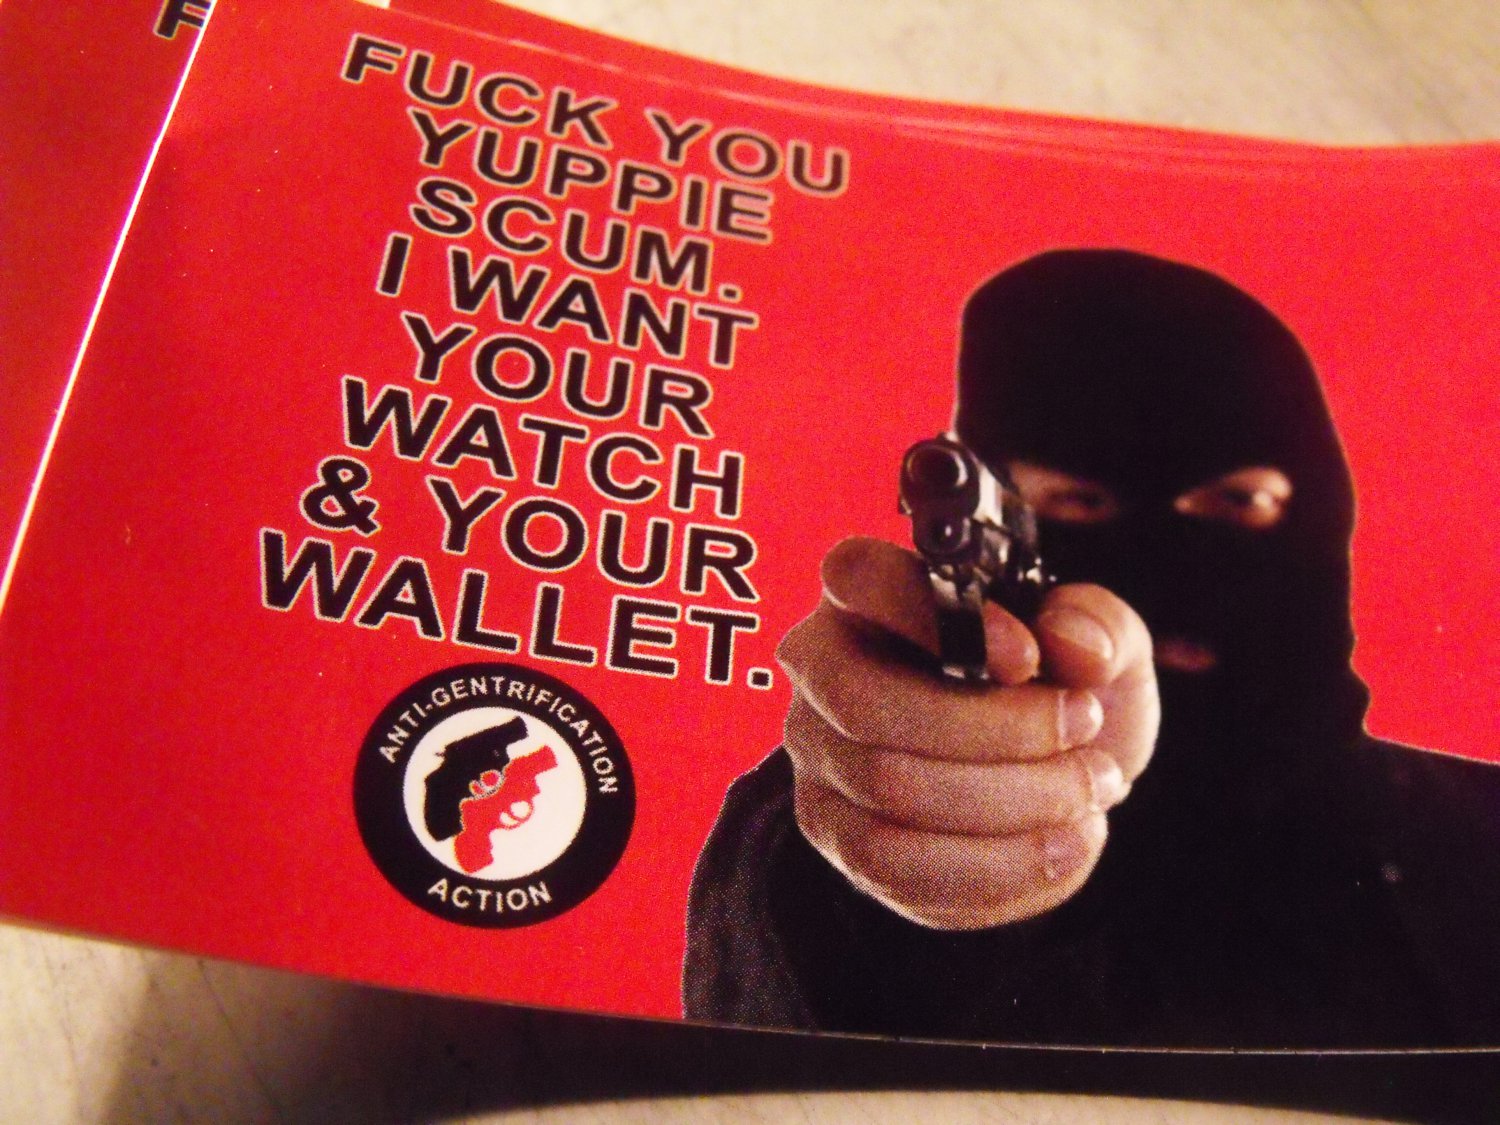 25 FUCK YOU YUPPIE SCUM.  I WANT YOUR WATCH & YOUR WALLET.  3.5" x 2.25"  stickers